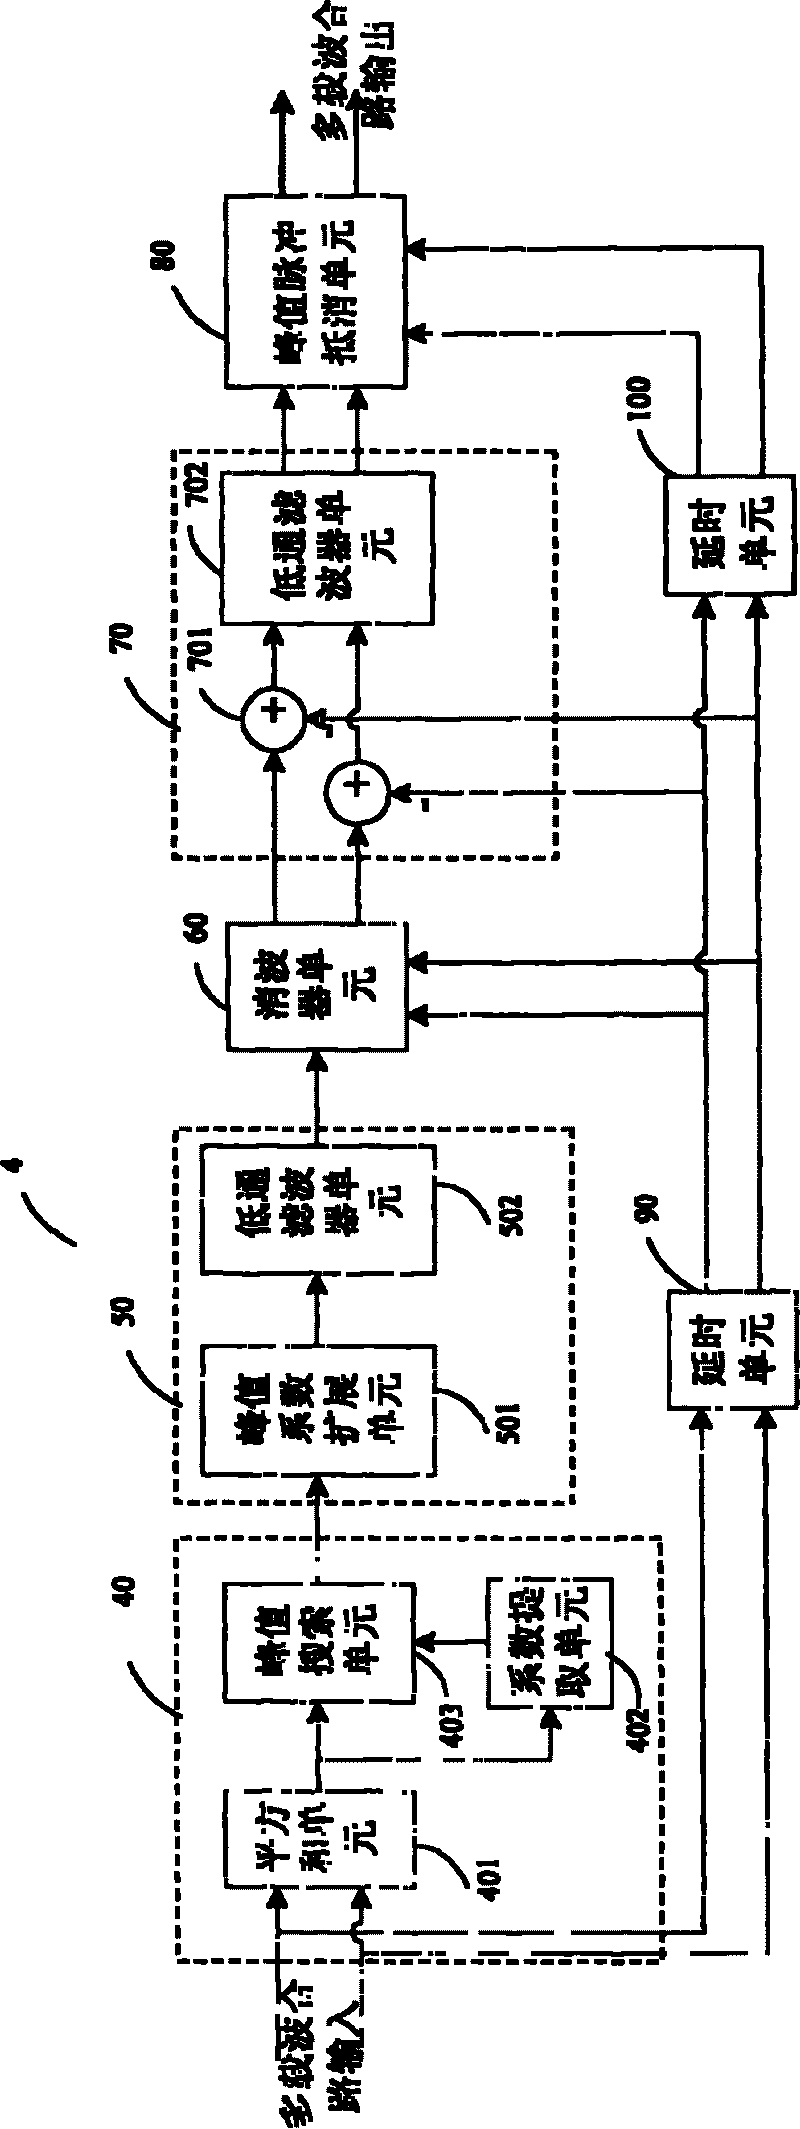 Optimized multi-carrier signal slicing device and method therefor